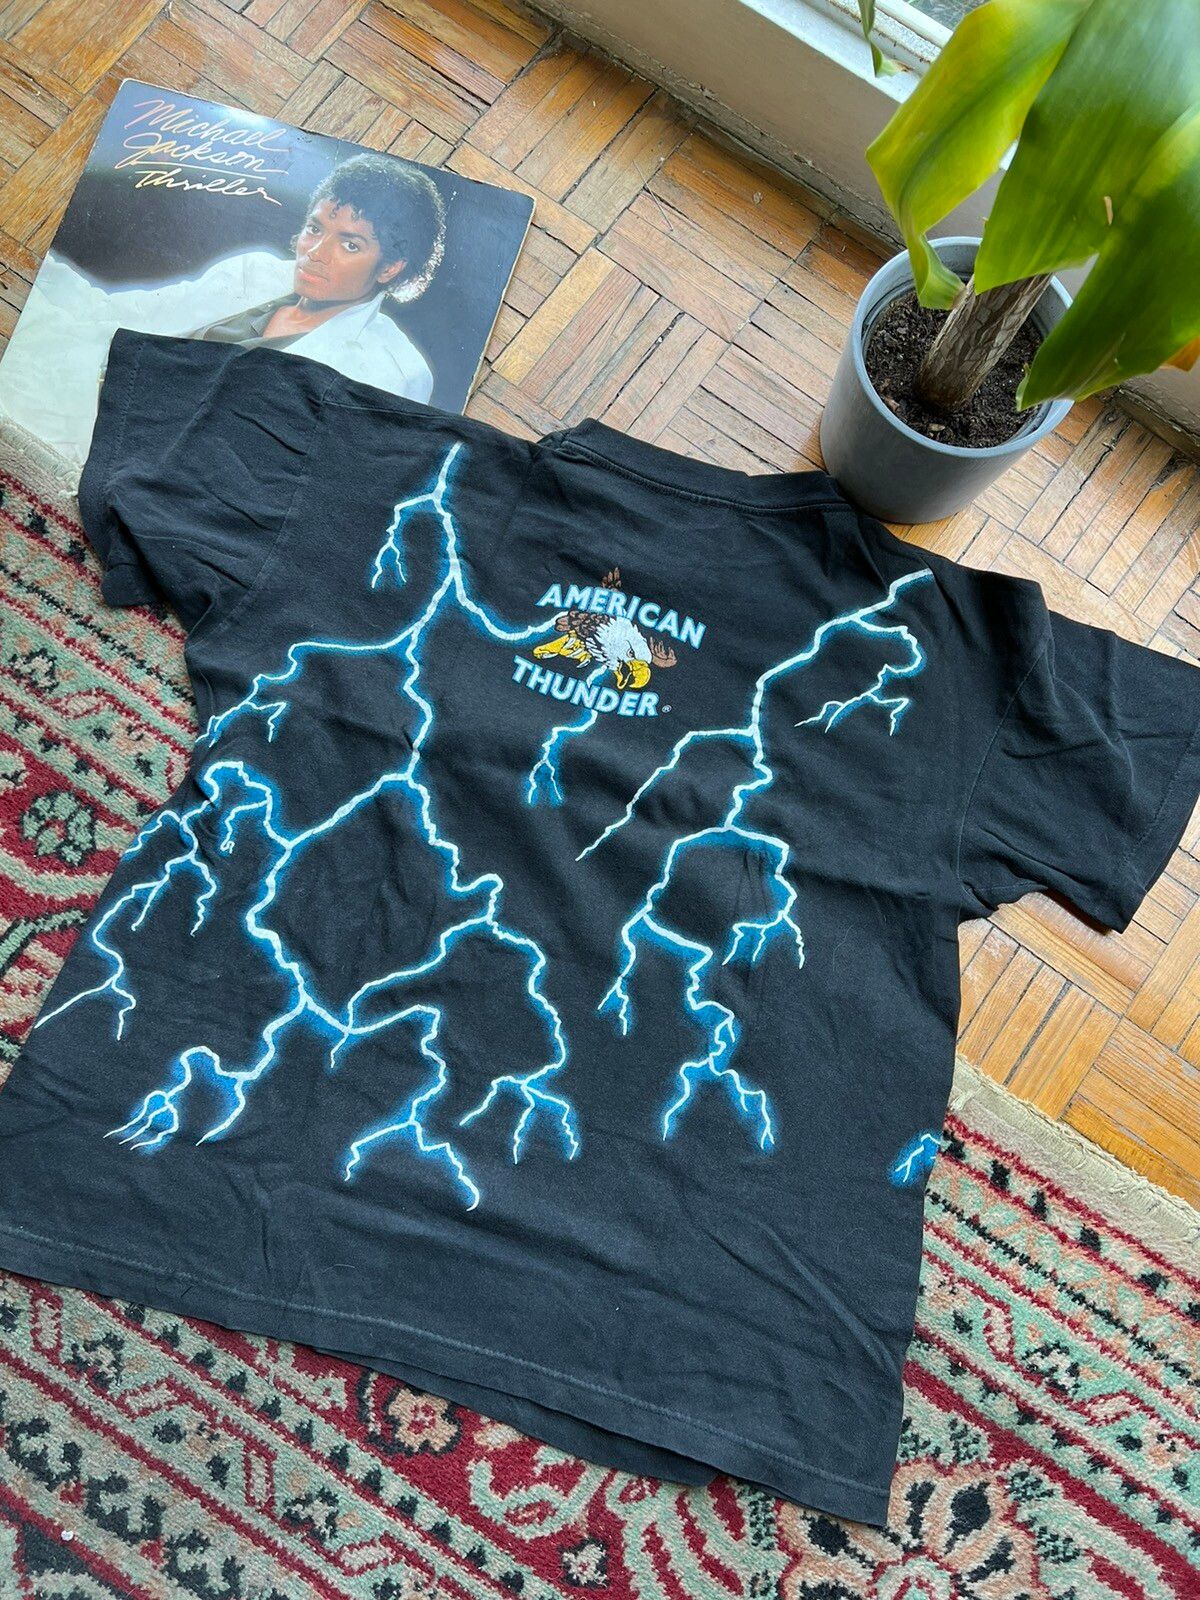 Vintage 90s Native Wolf American Thunder Single Stitch Nature Tee Size US L / EU 52-54 / 3 - 2 Preview